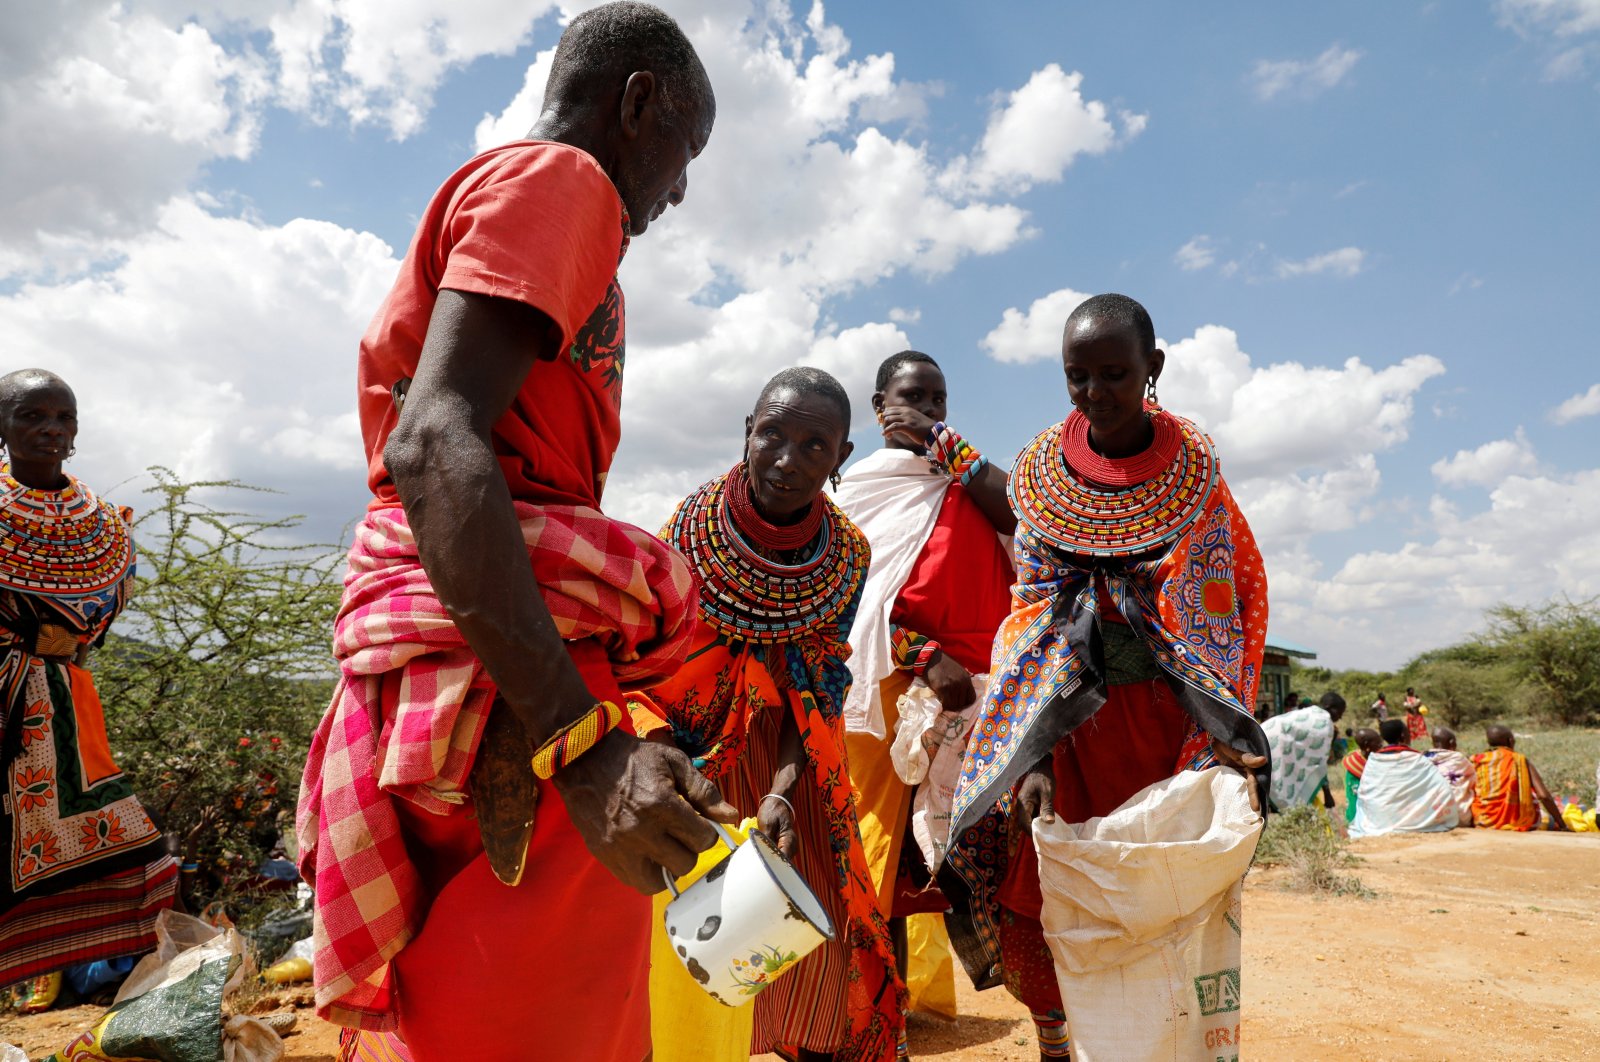 Women from the Samburu tribe receive a food donation given due to an ongoing drought, in the town of Oldonyiro, Isiolo county, Kenya, October 8, 2021. (Reuters File Photo)